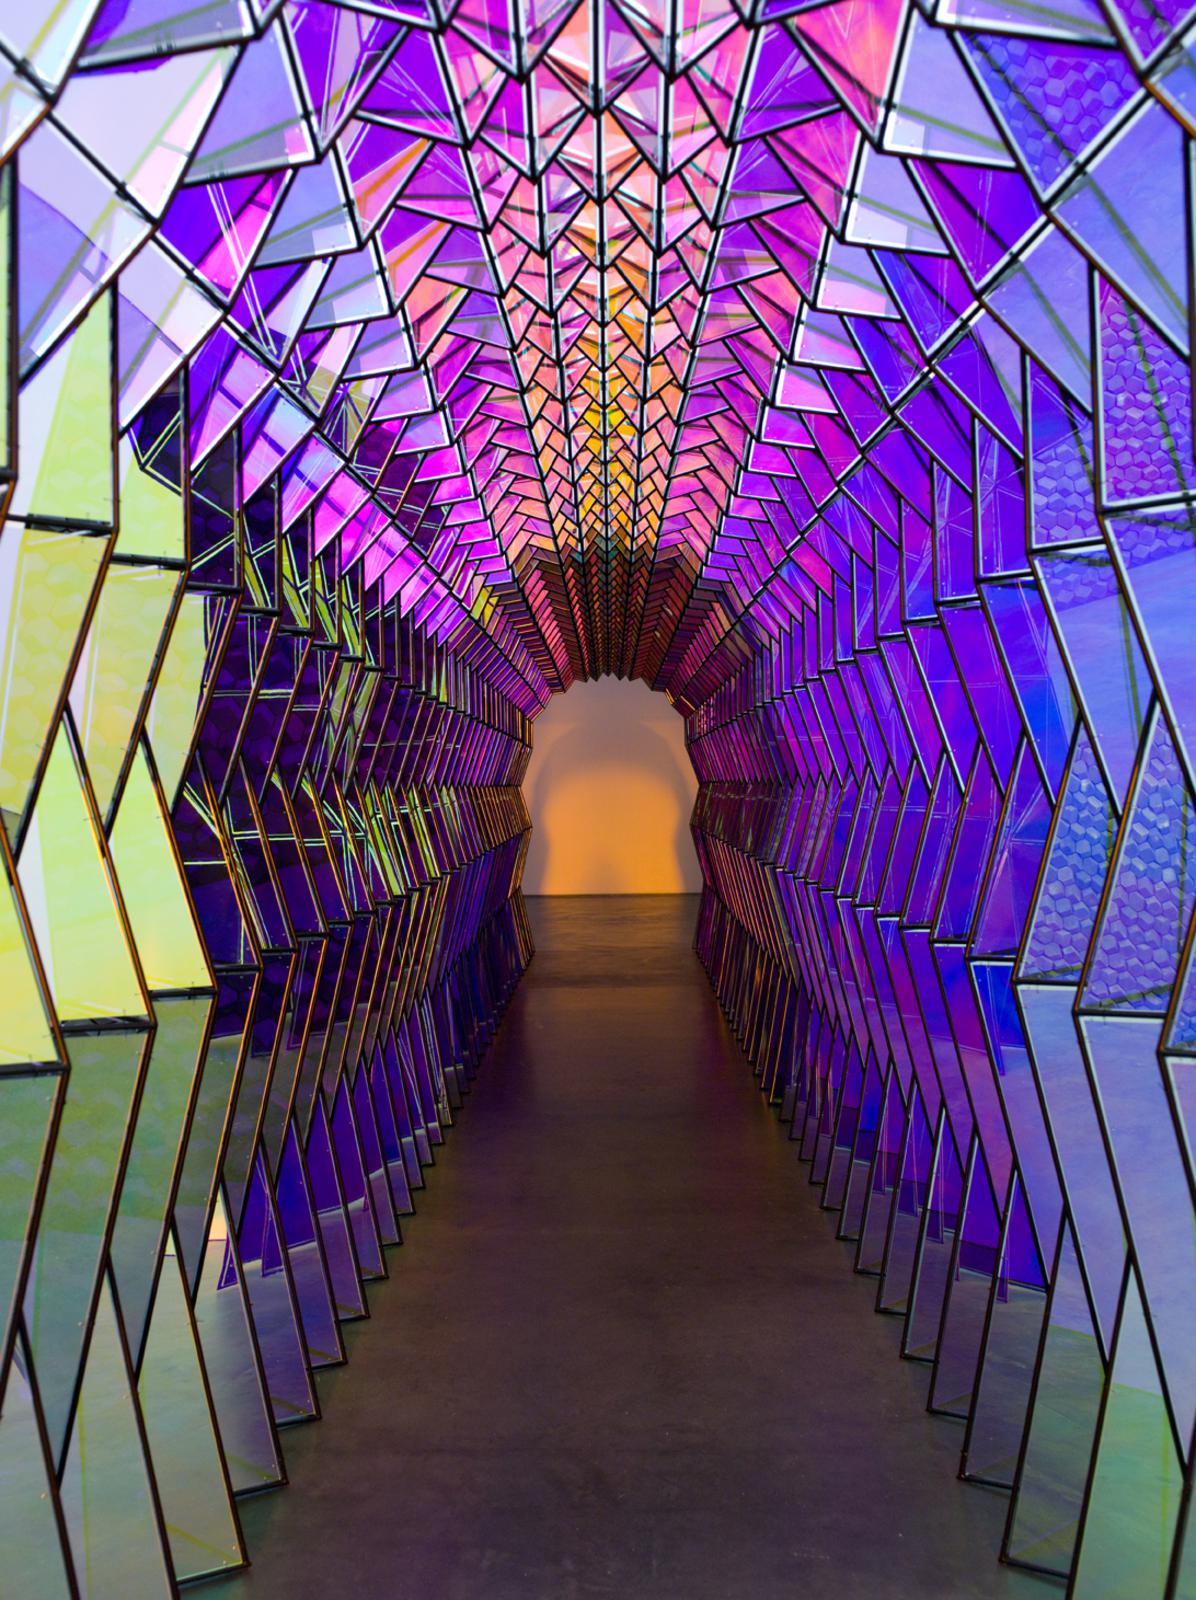  Olafur Eliasson; One-way colour tunnel, 2007; Installation view: Museum of Contemporary Art, Chicago, 2009; Photo: Nathan Keay / Courtesy of Museum of Contemporary Art Chicago © 2007 Olafur Eliasson 